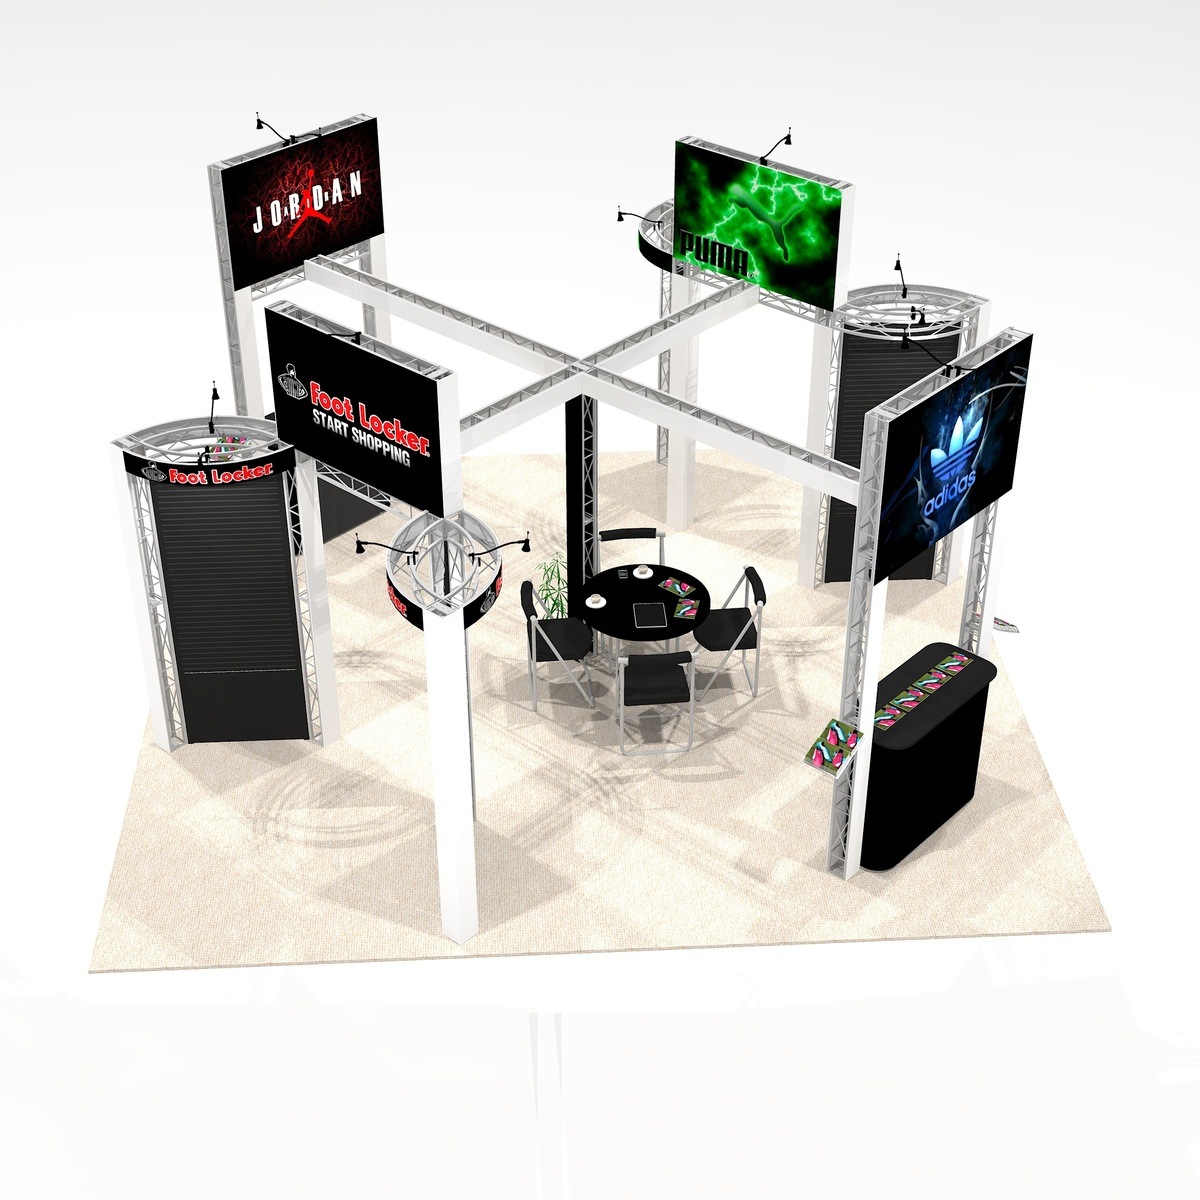 Island trade show exhibit design FRA2020 Graphic Package A